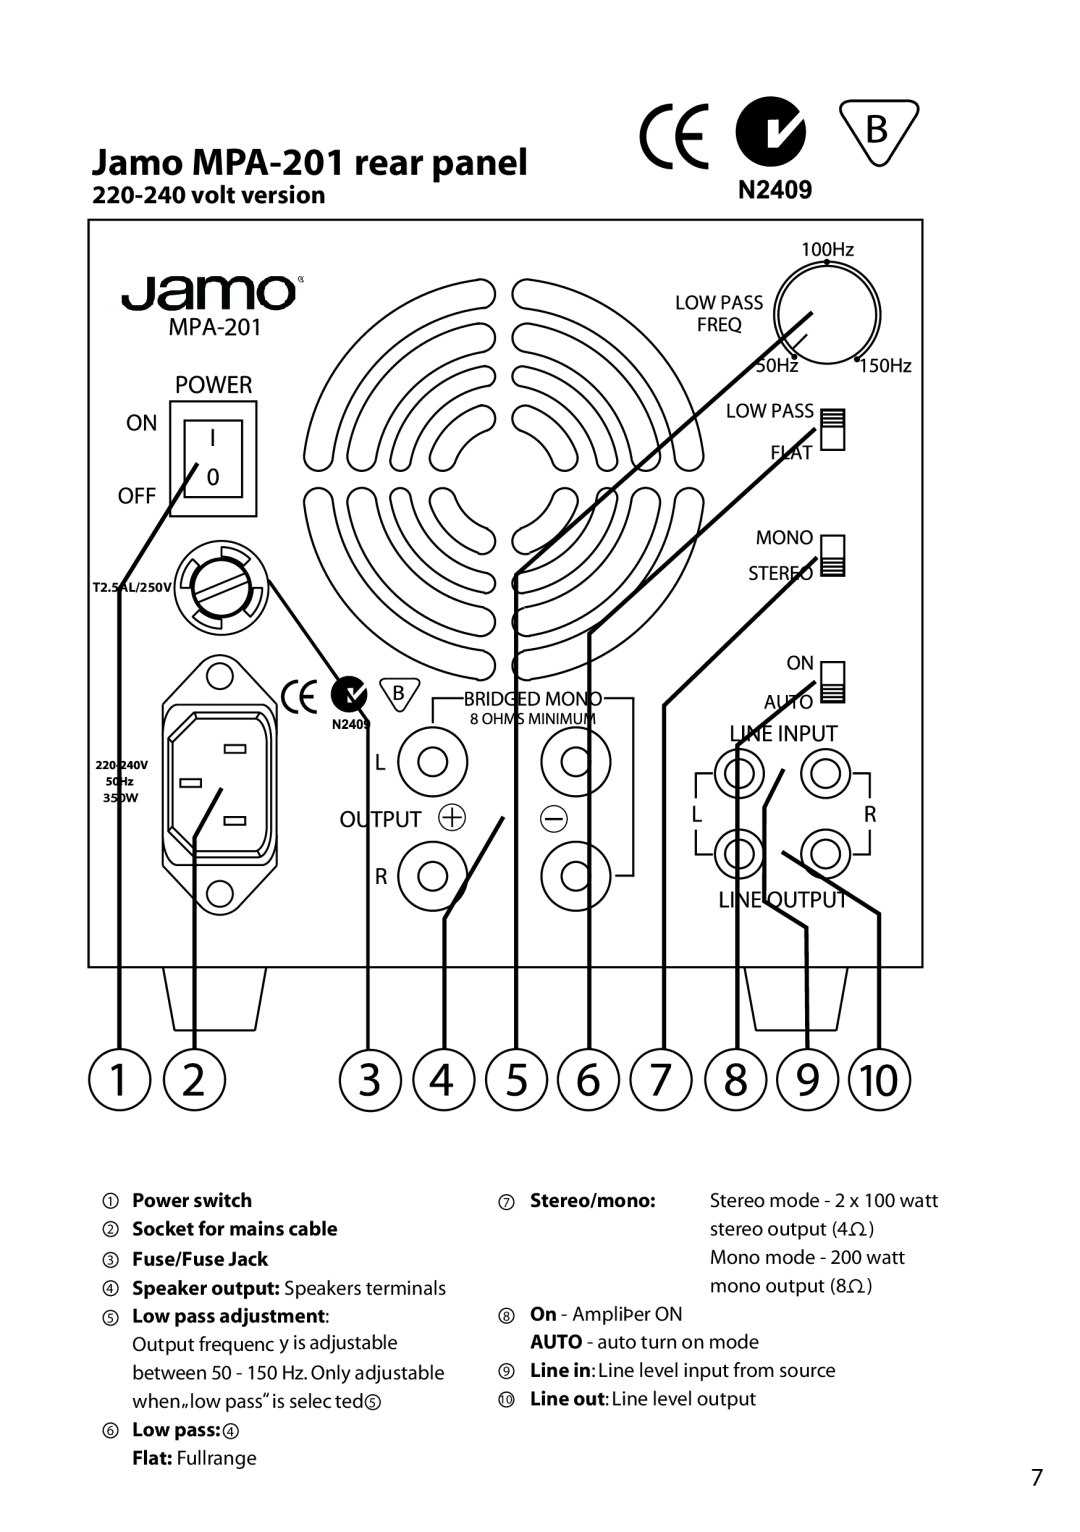 JAMO Jamo MPA-201rear panel, Power switch, Stereo/mono, Socket for mains cable, Fuse/Fuse Jack, Low pass adjustment 